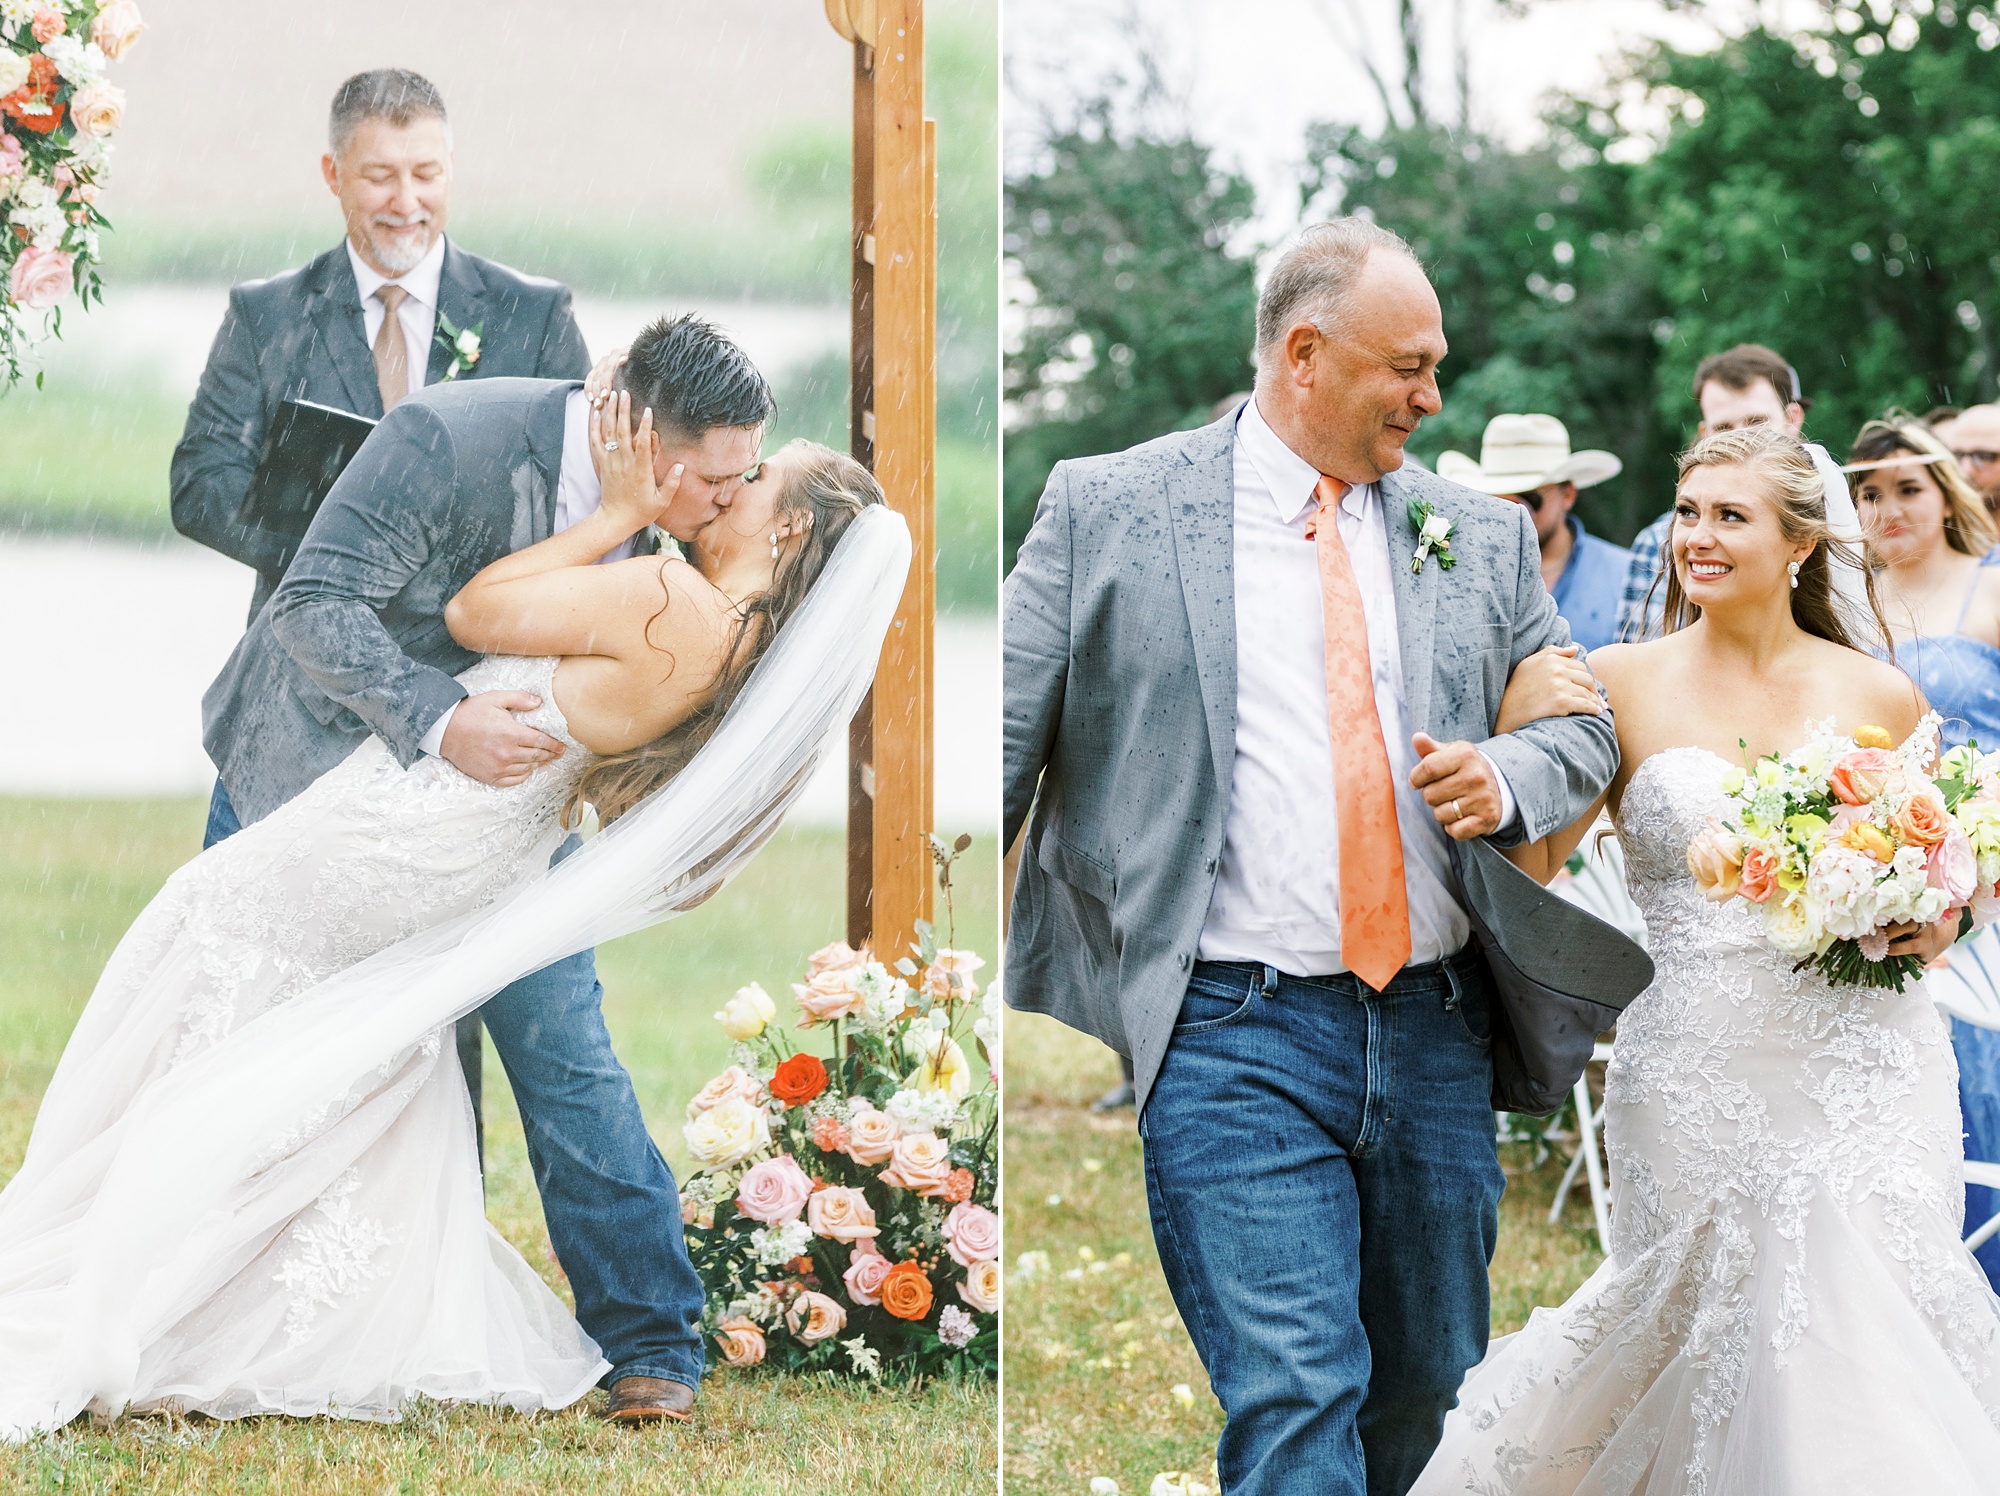 Rainy Wedding Day Must-Haves: my favorite Amazon finds to keep rainy wedding days dry shared by NC wedding photographer Kevyn Dixon